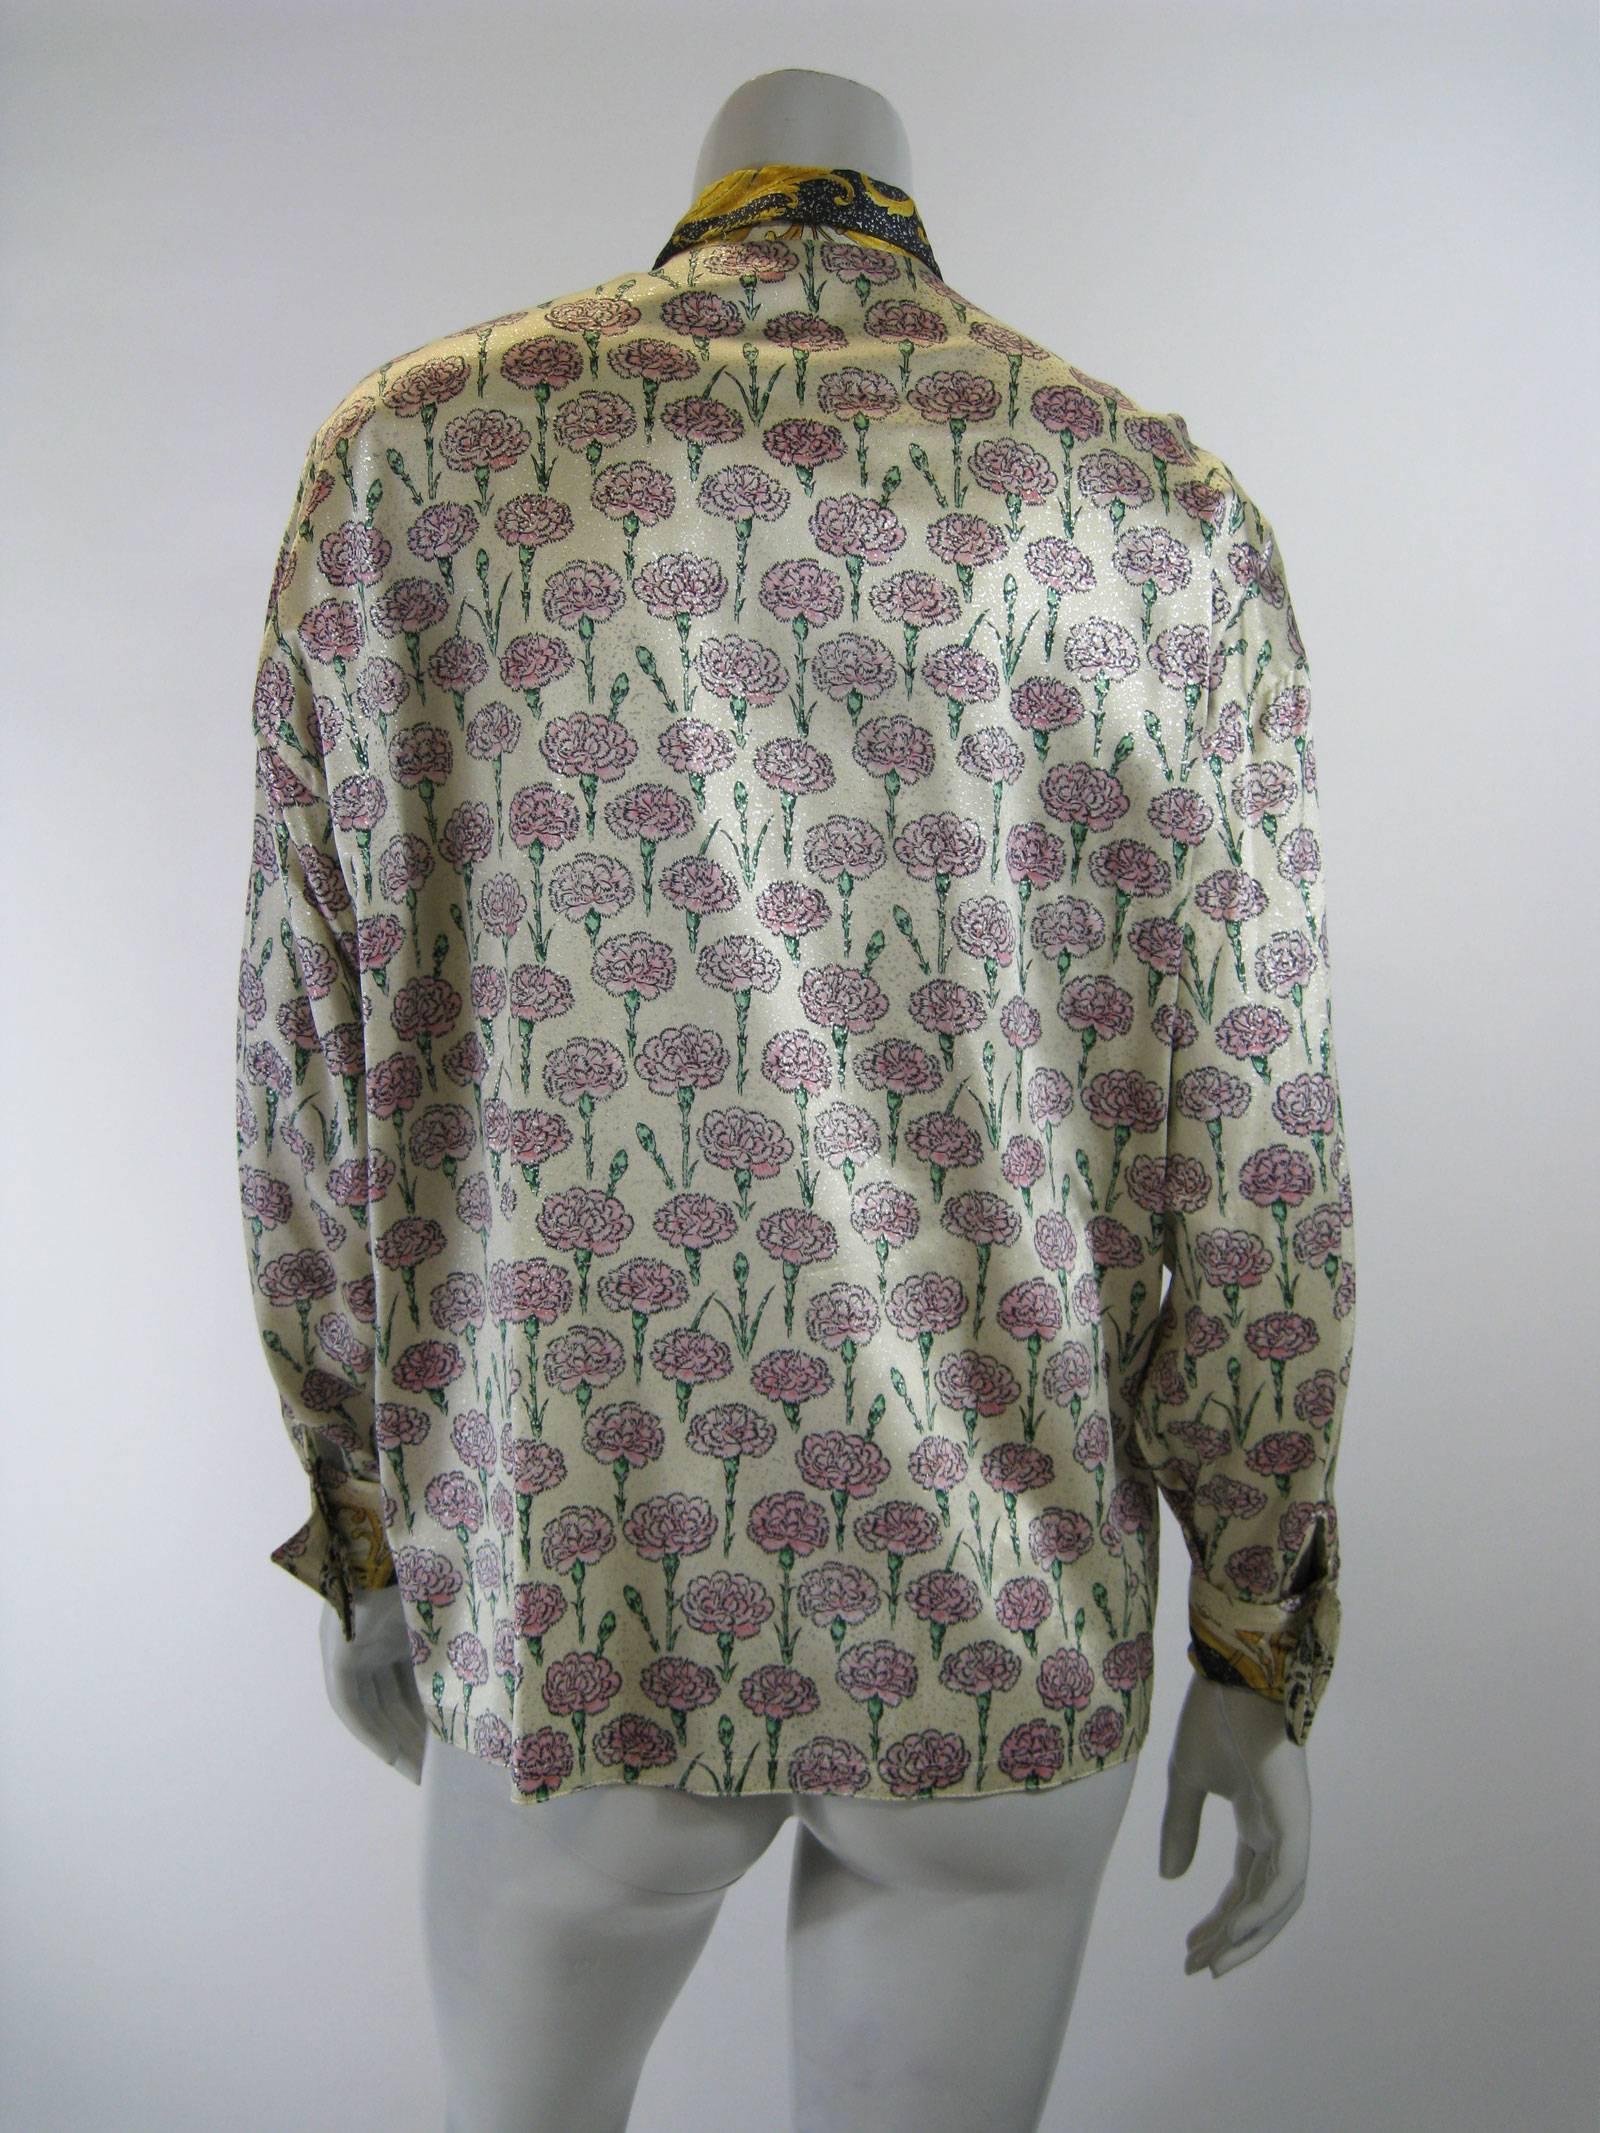 Gianni Versace Silk Floral Motif Print Blouse In Excellent Condition For Sale In Oakland, CA